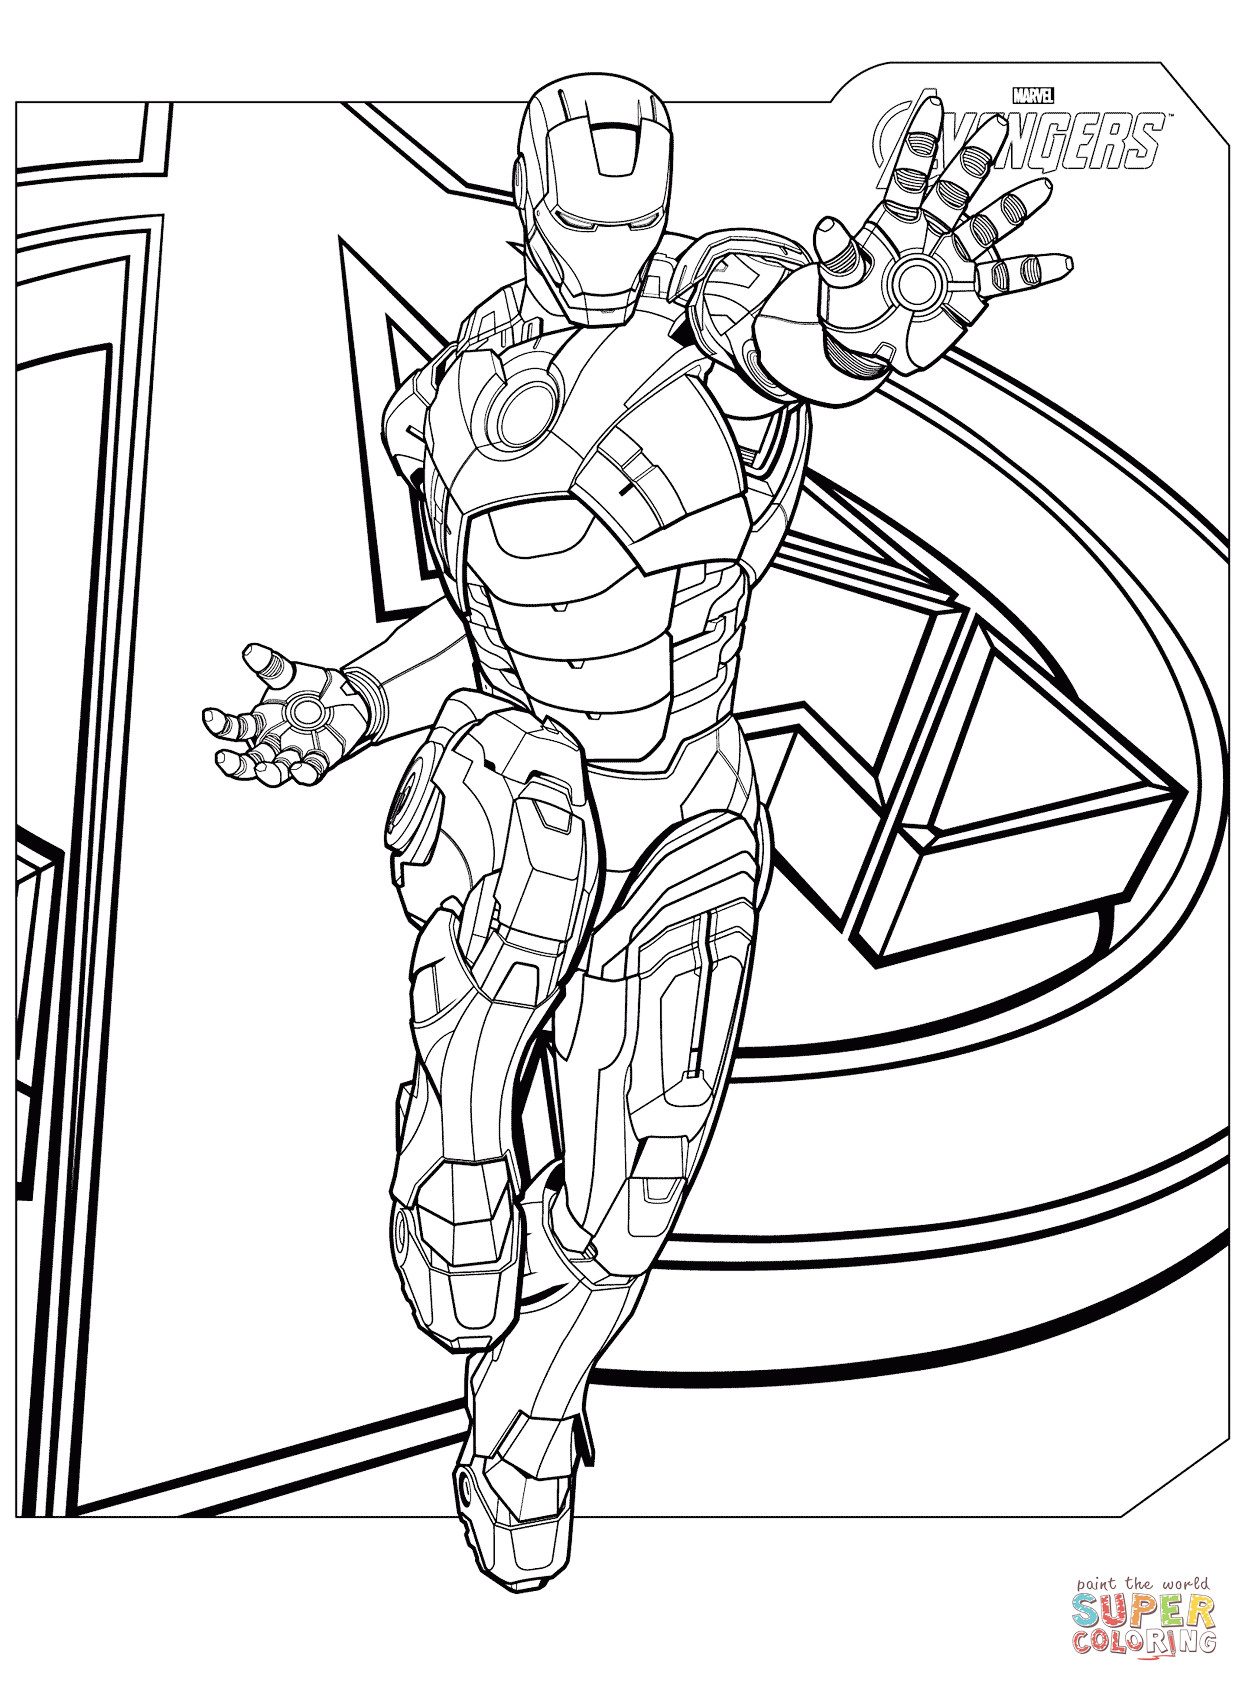 Printable Avengers Coloring Pages
 Avengers Iron Man coloring page